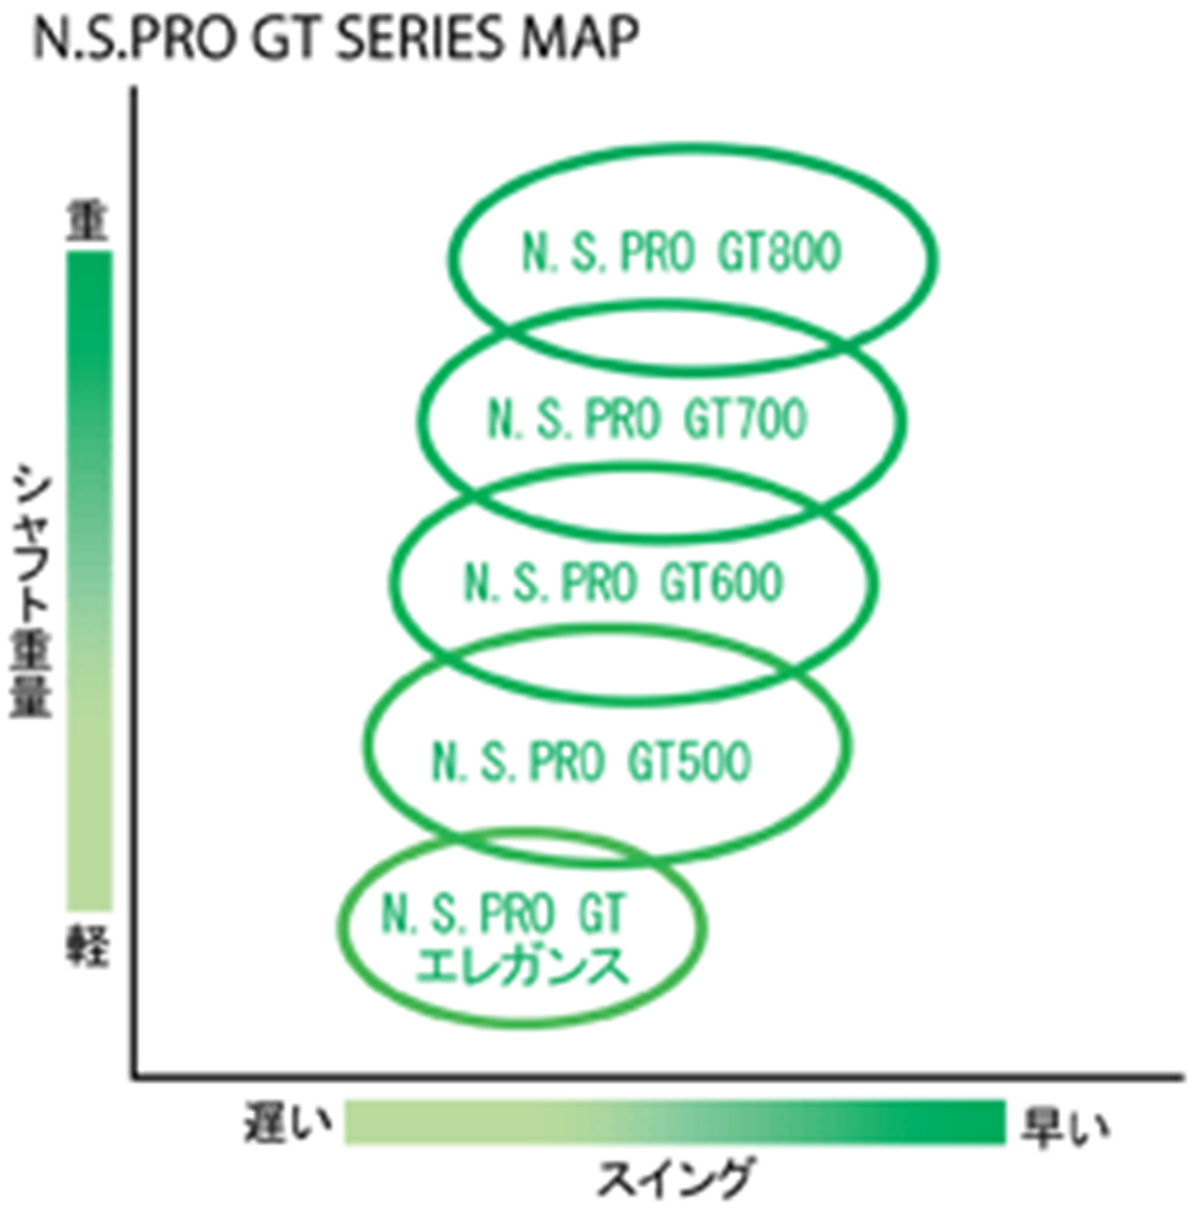 N.S.PRO GT SERIES MAP